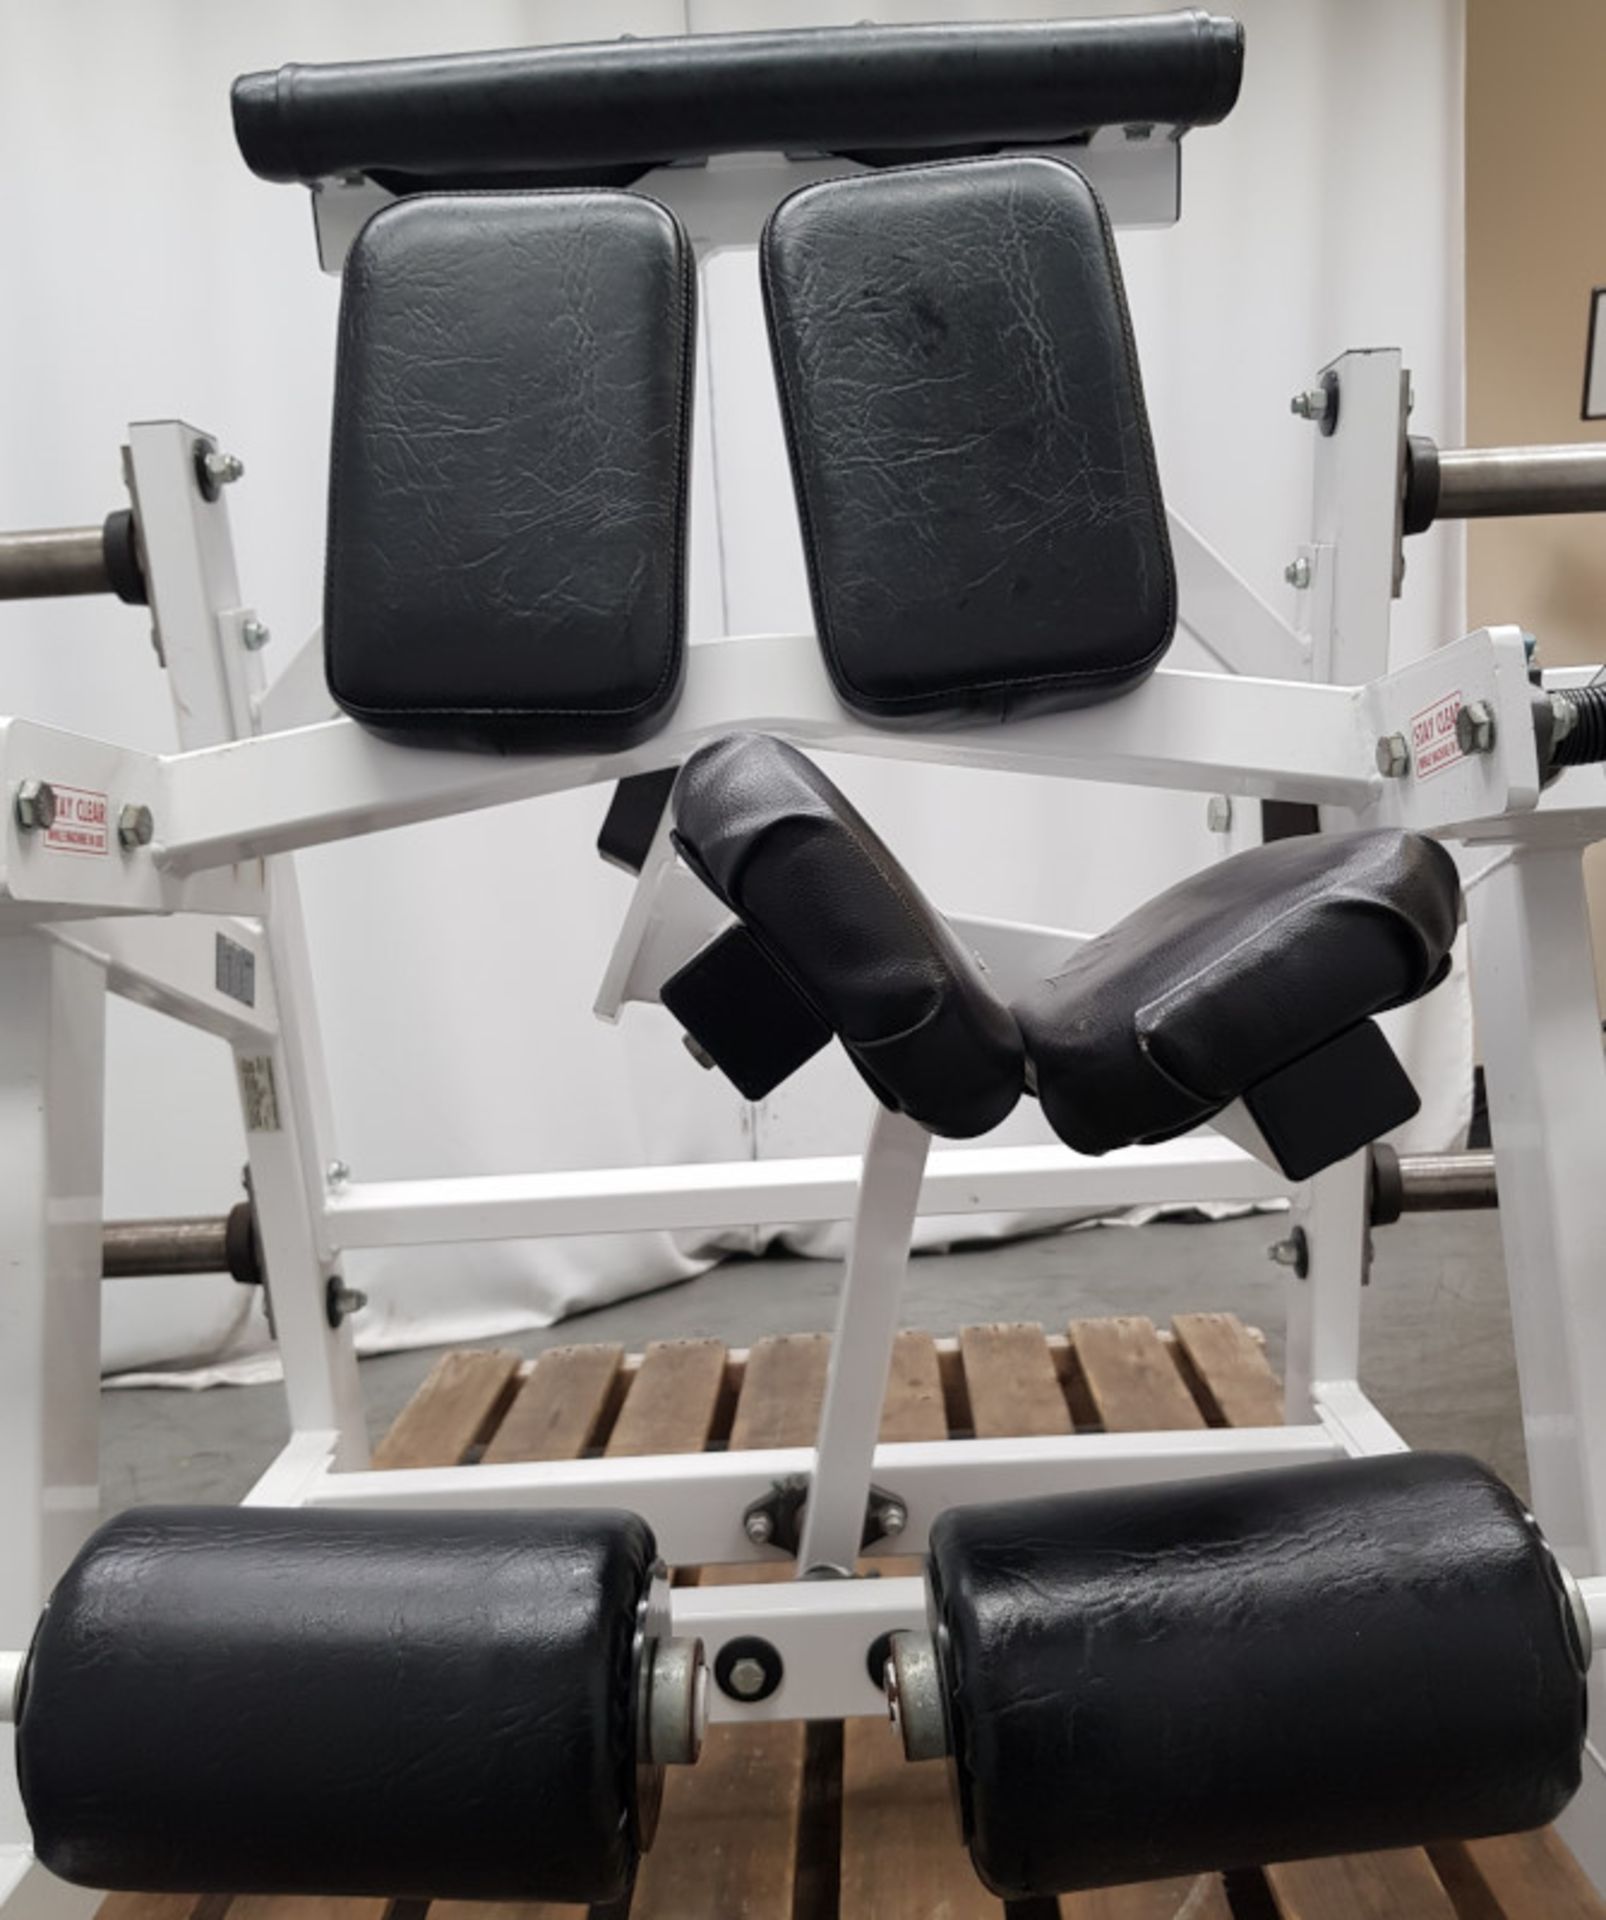 Hammer Strength ISO Lateral Kneeling Leg Curl Machine (minor damage to padding) - Image 7 of 8